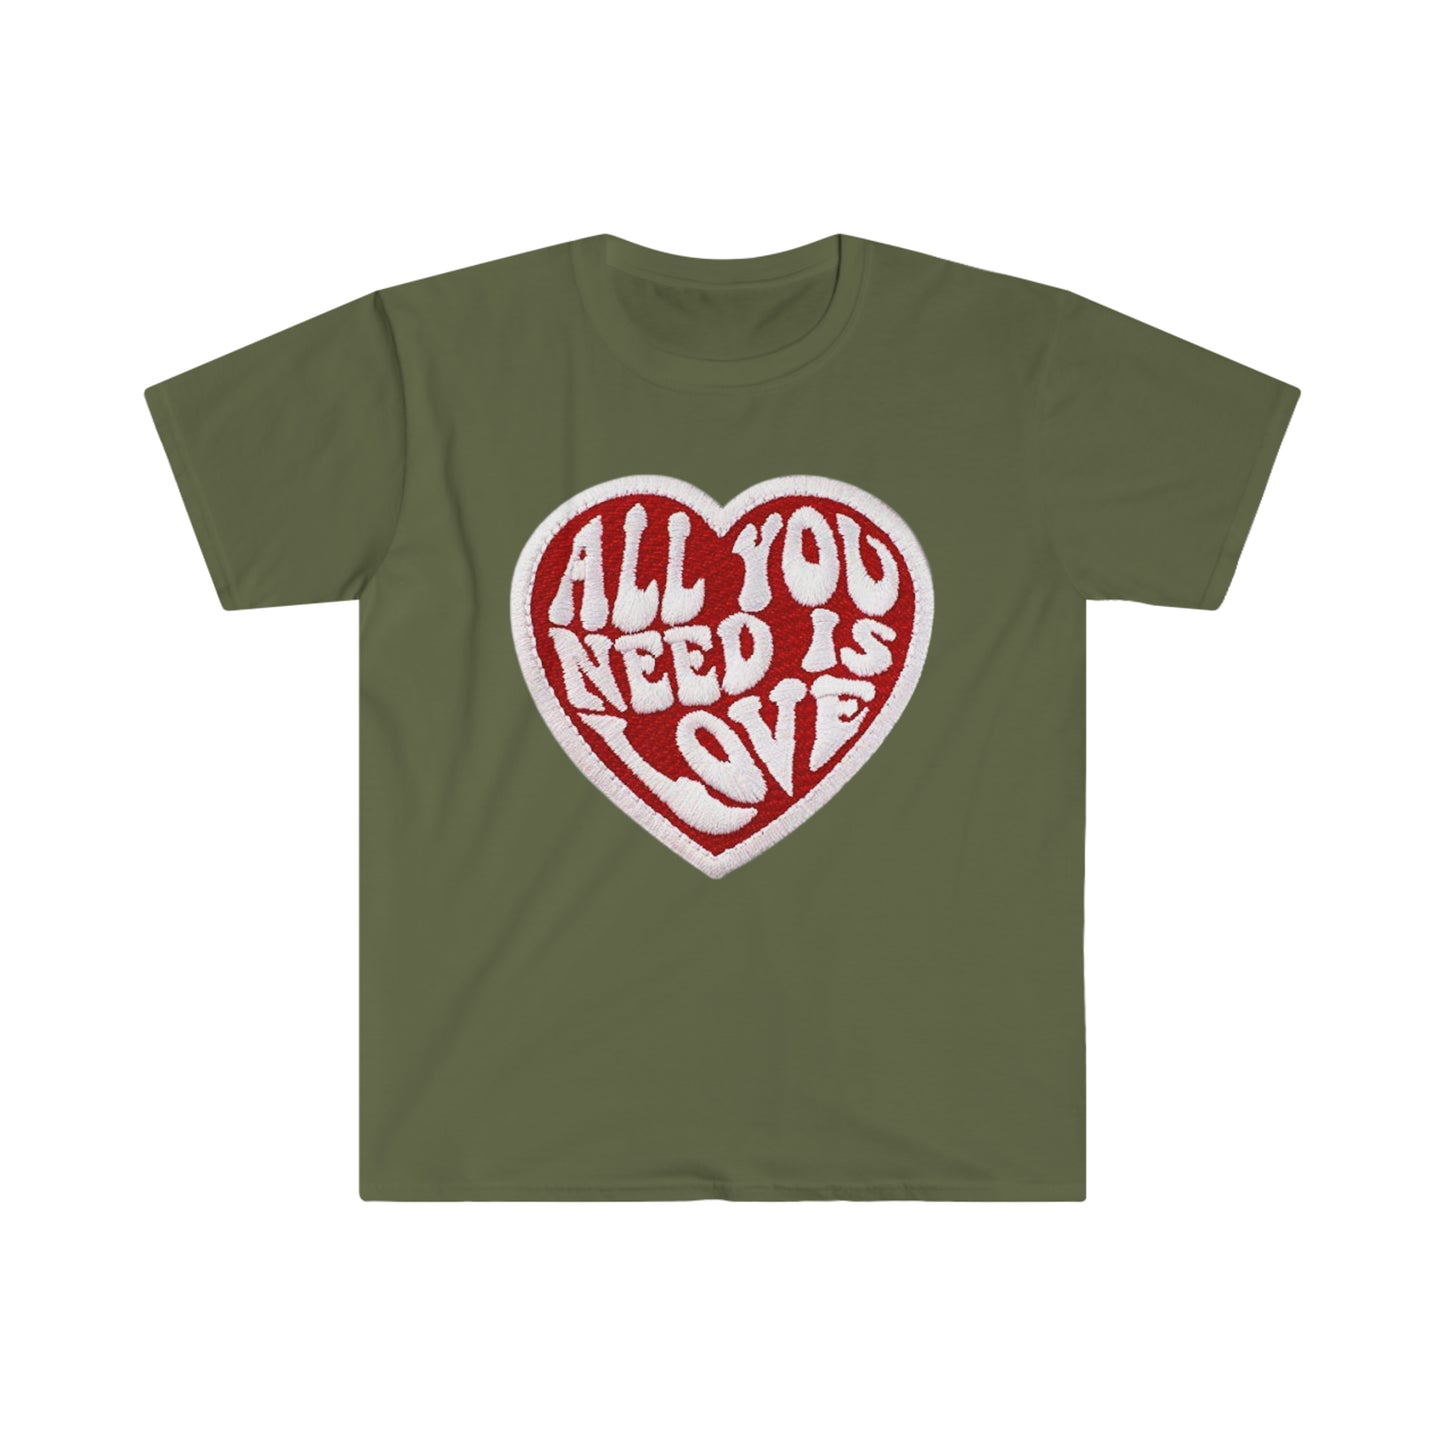 All you need is love Patch - Unisex Softstyle T-Shirt